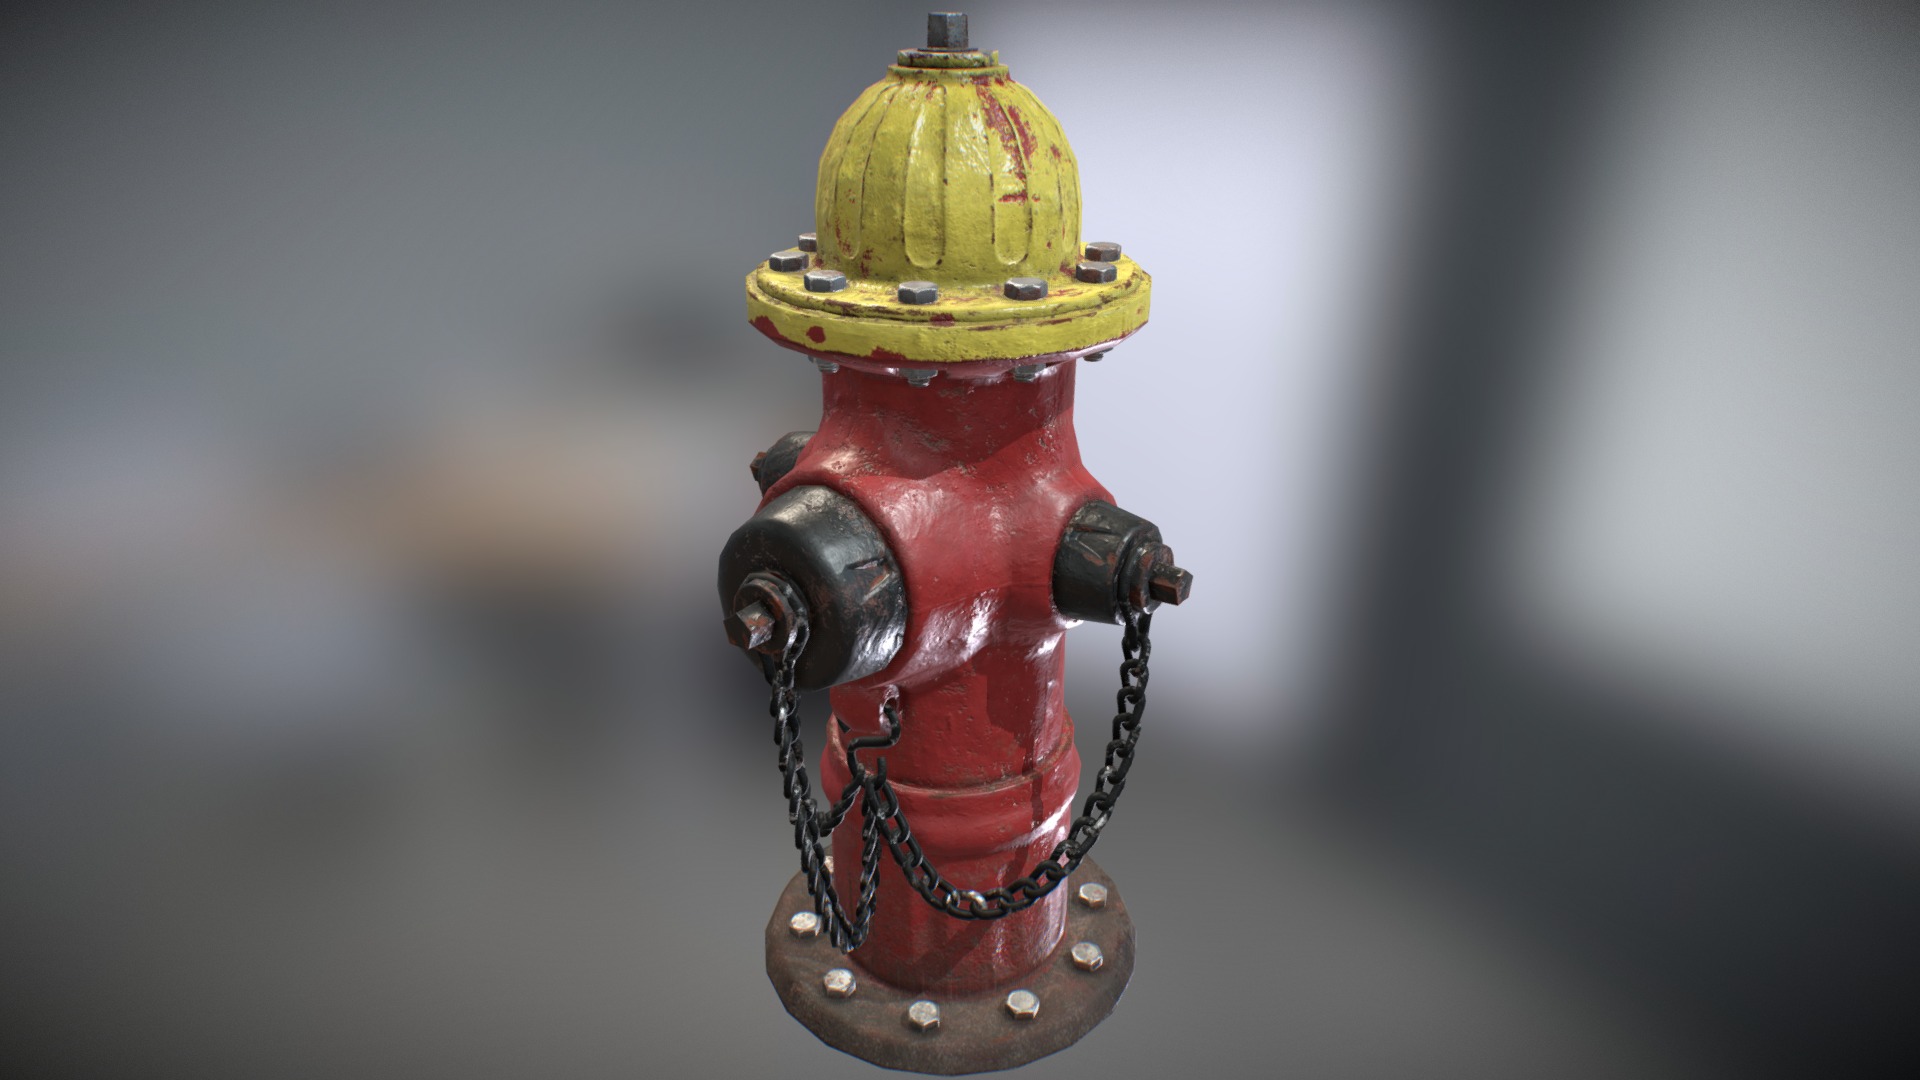 3D model Fire hydrant - This is a 3D model of the Fire hydrant. The 3D model is about a fire hydrant with a yellow top.